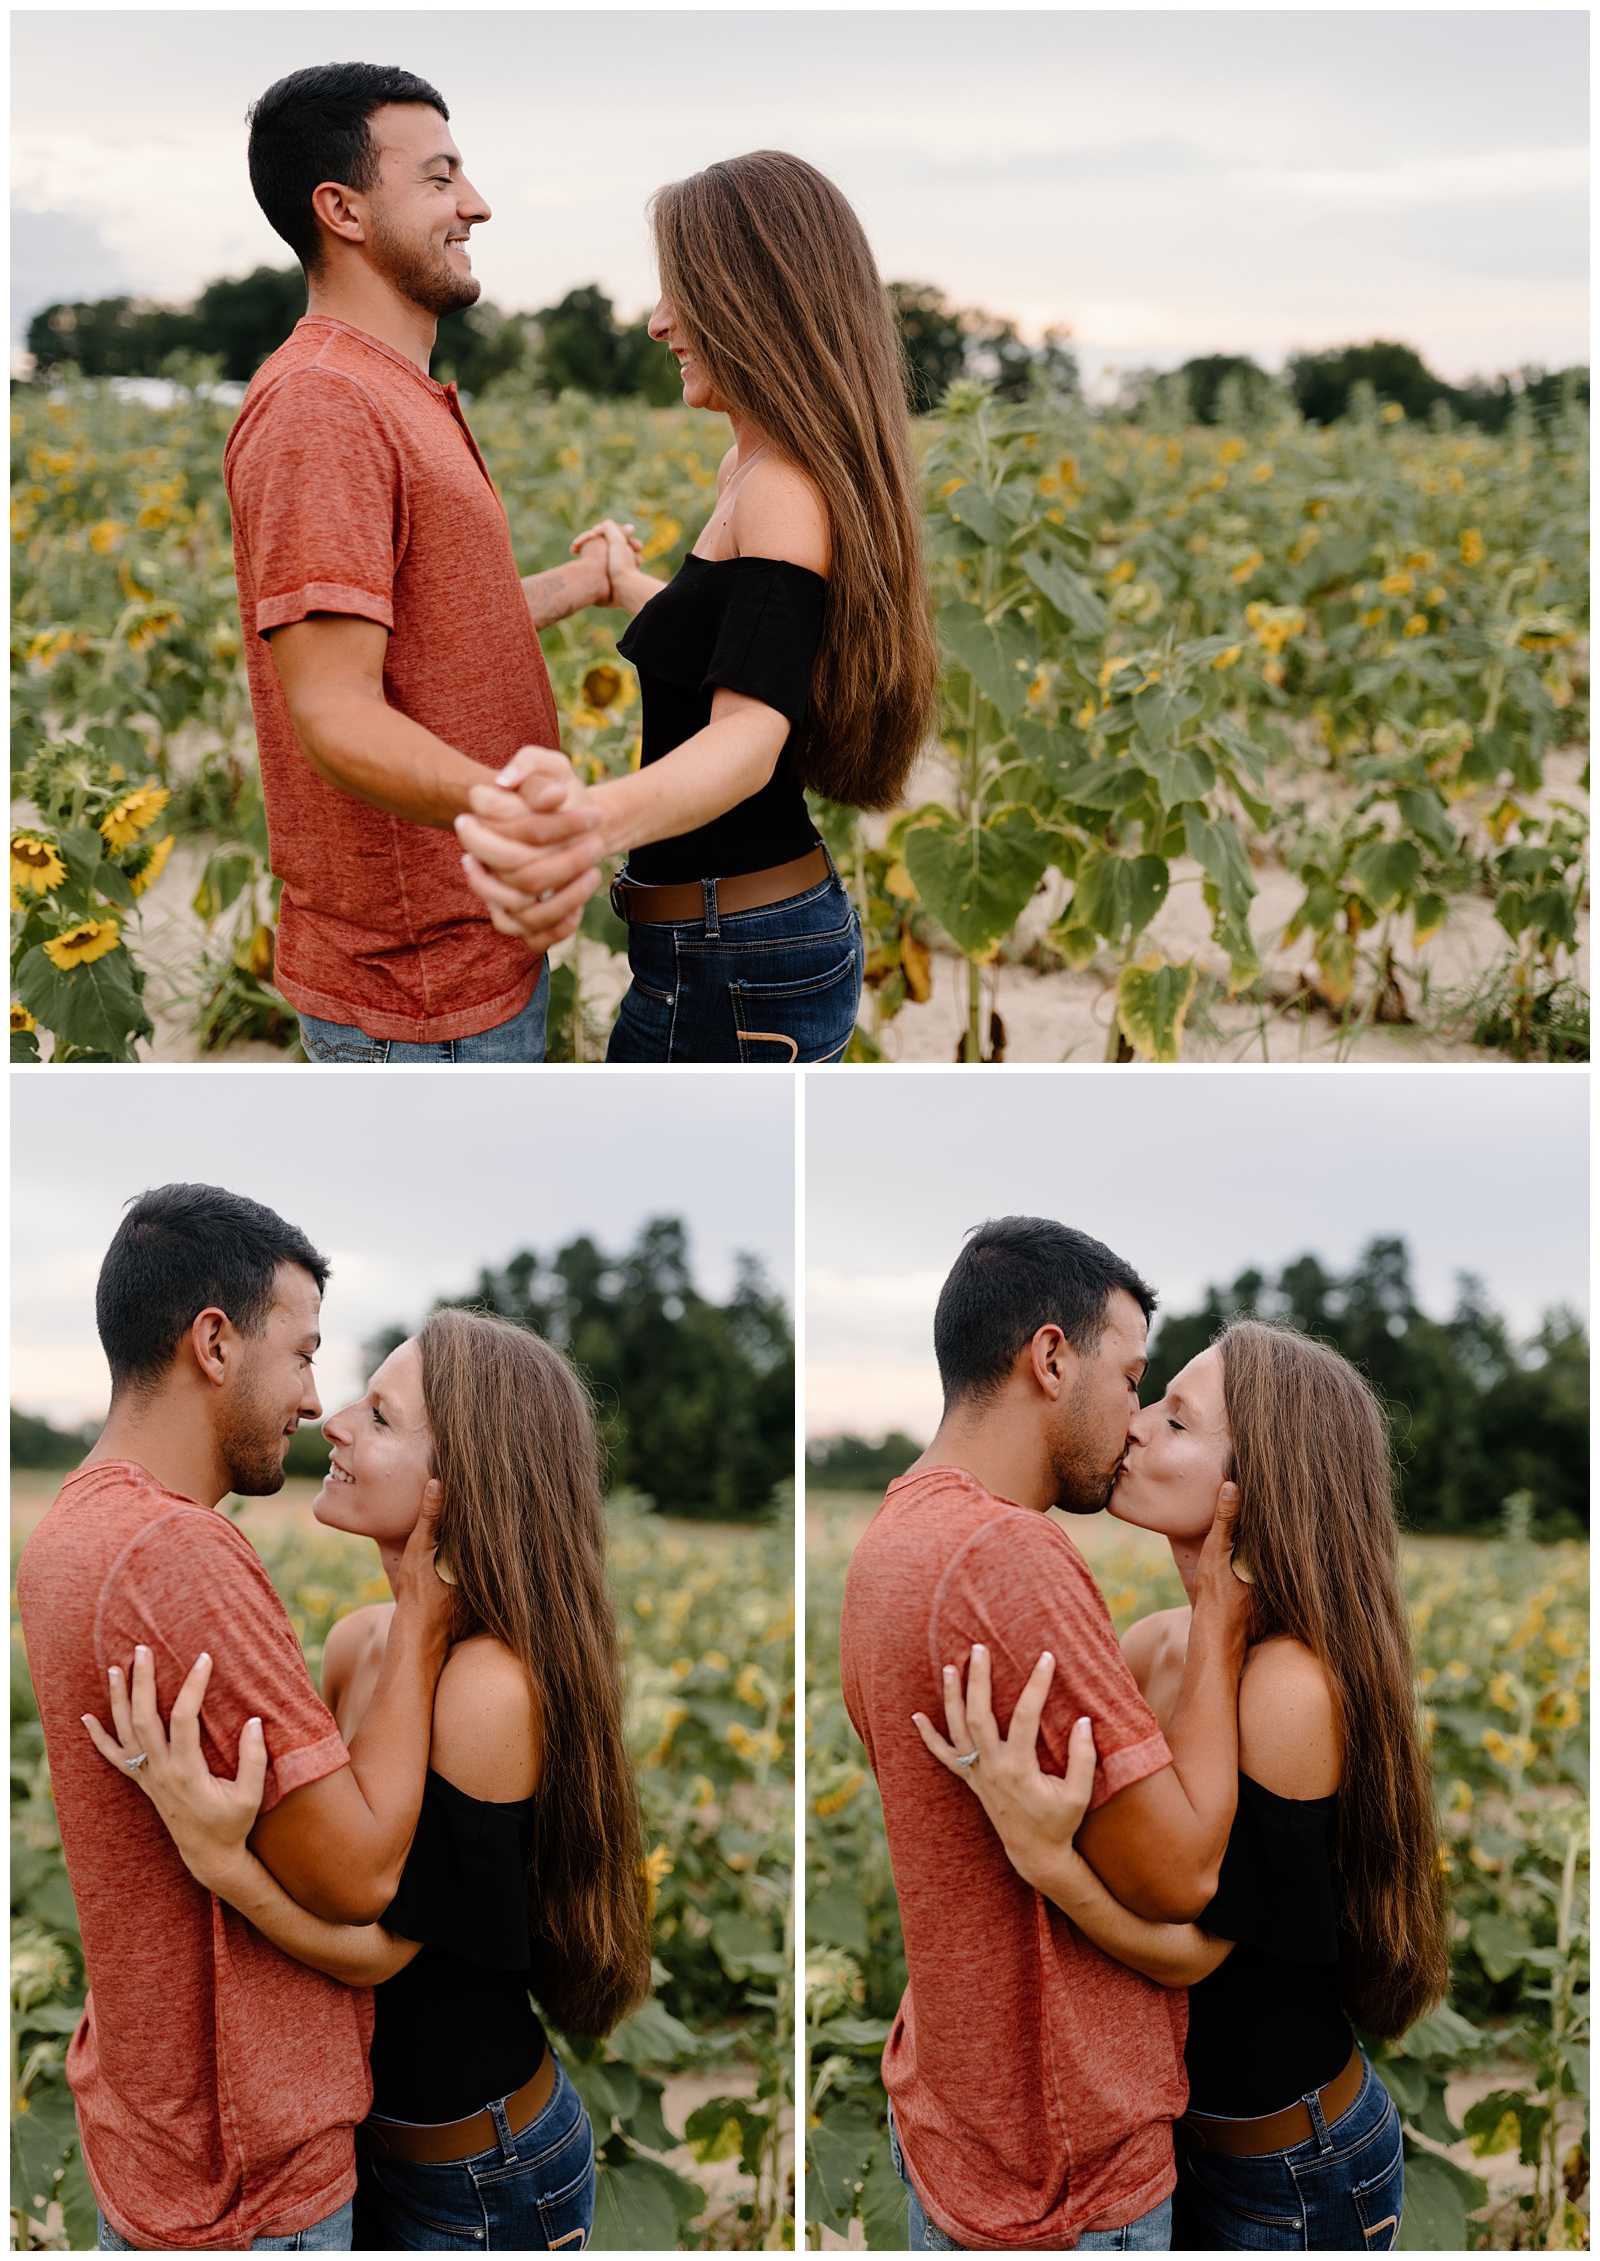 Summer time engagement session in a sunflower field near Greensboro, NC